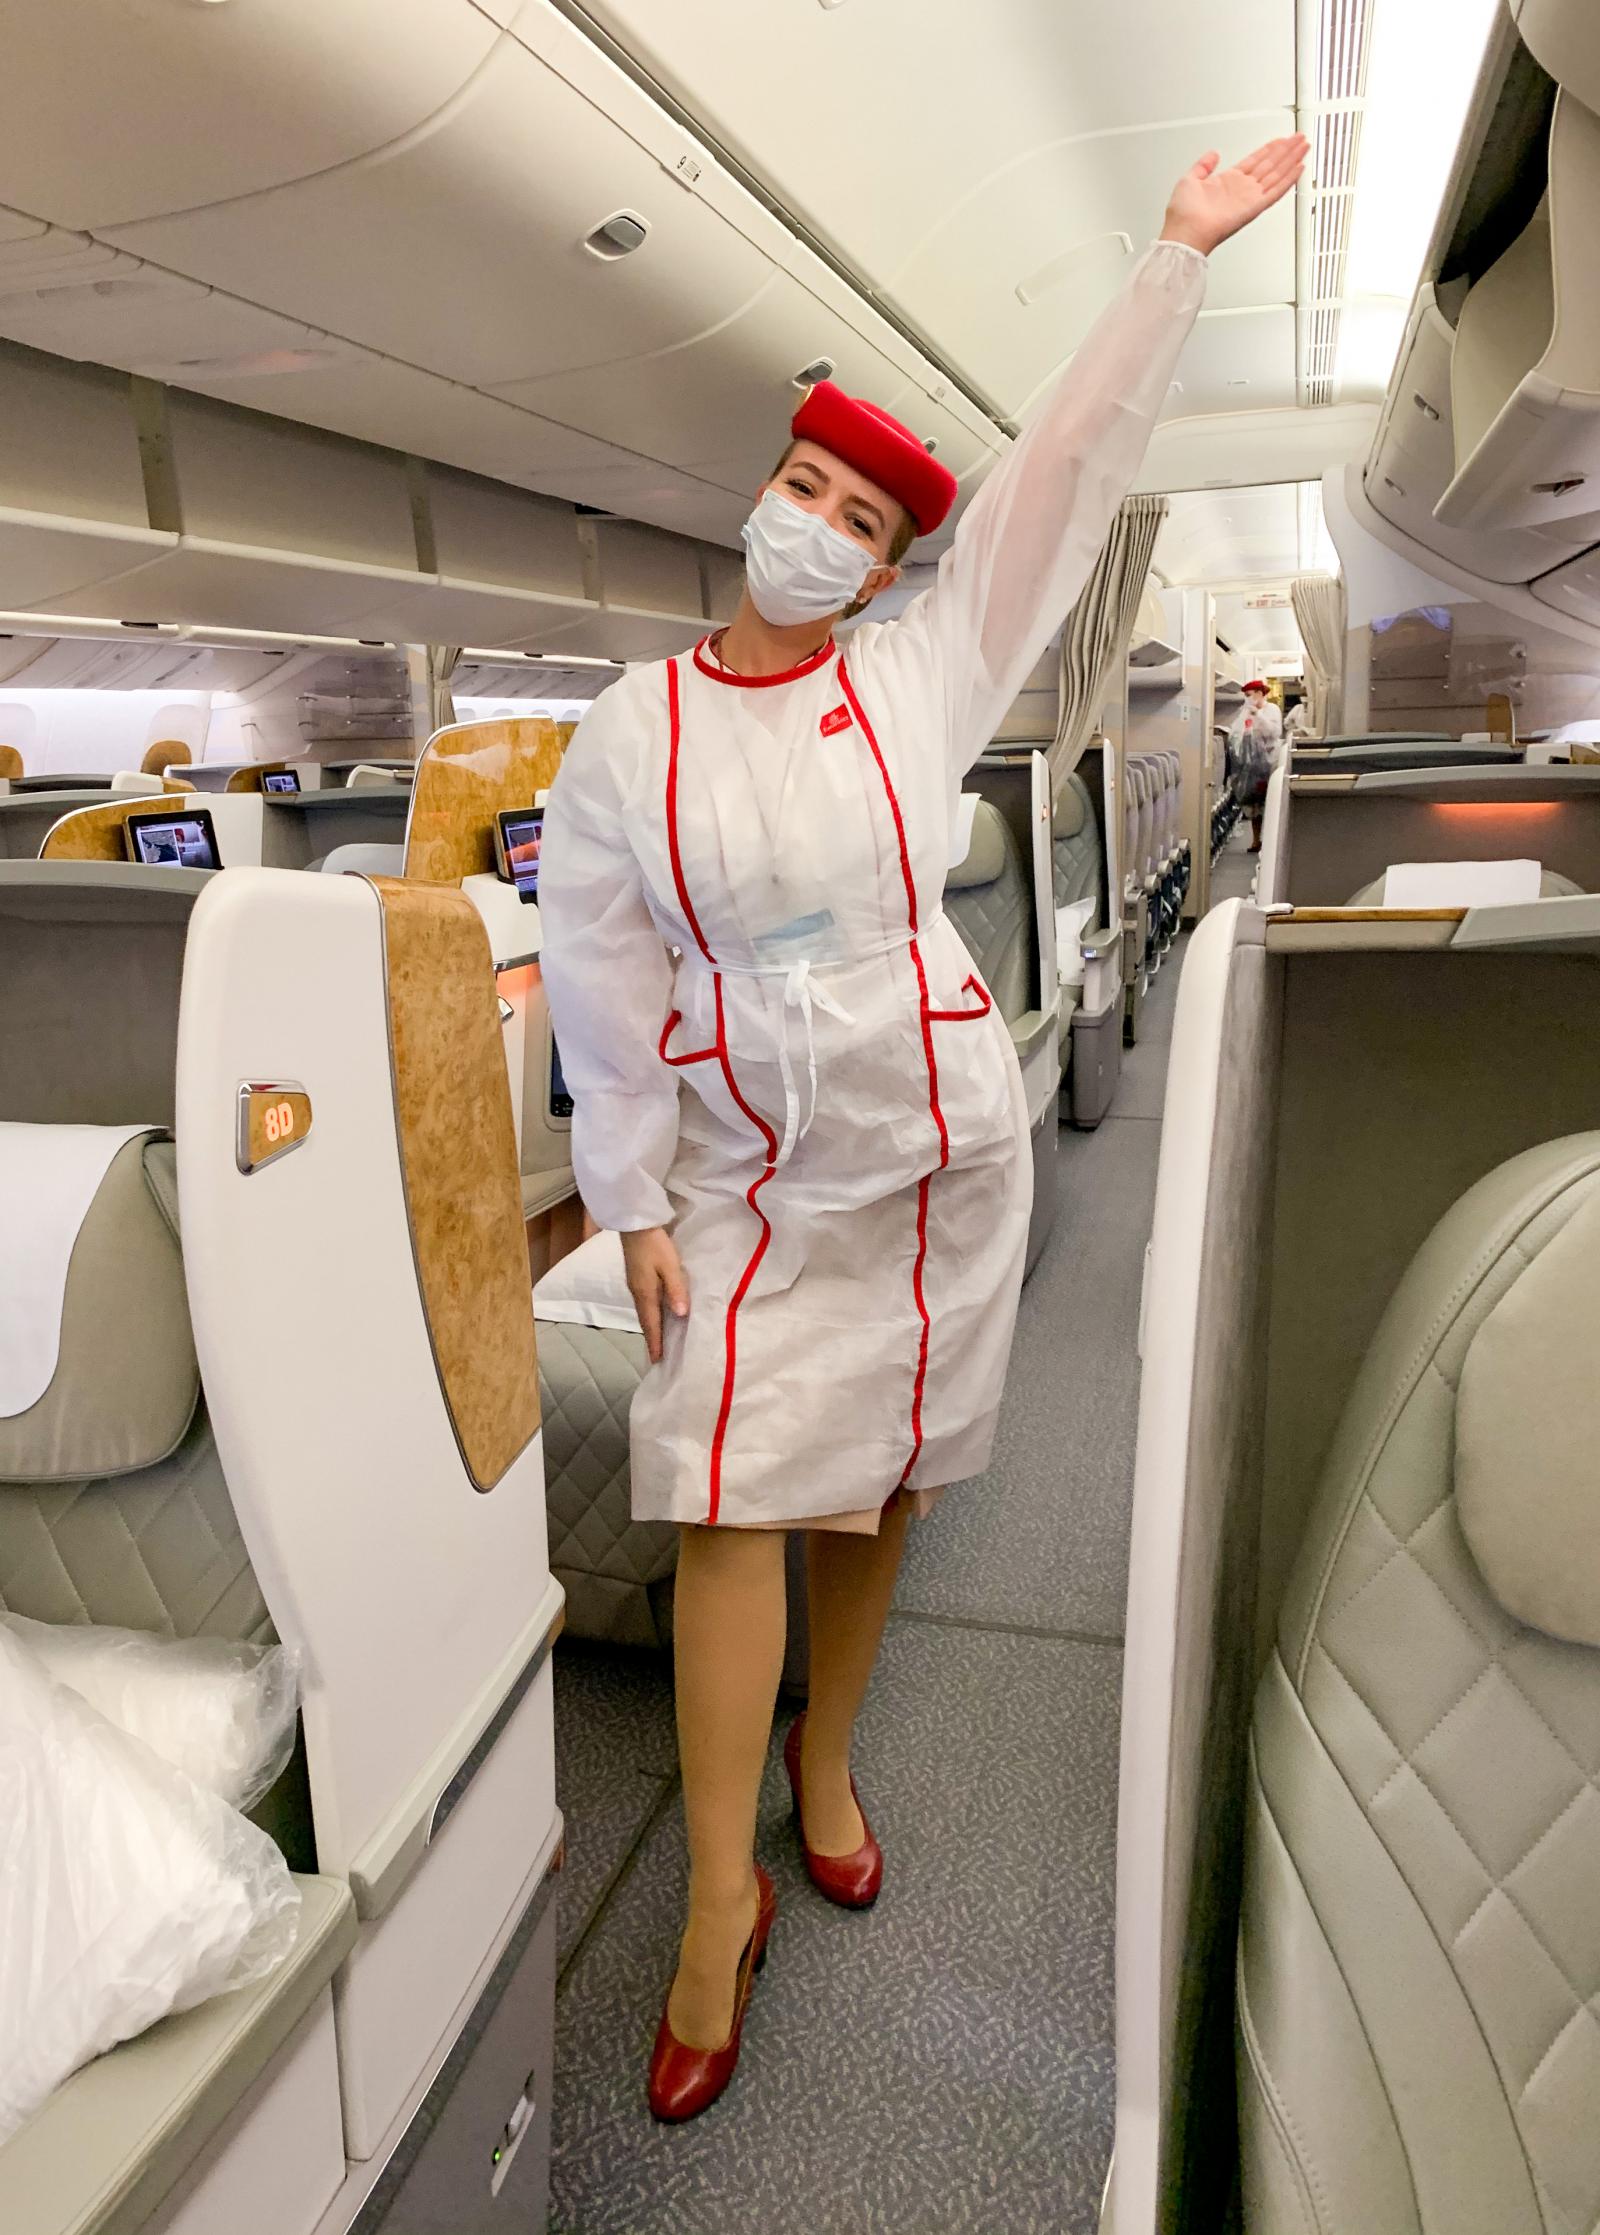 Emirates tests home check-in, will pick up your luggage at your door